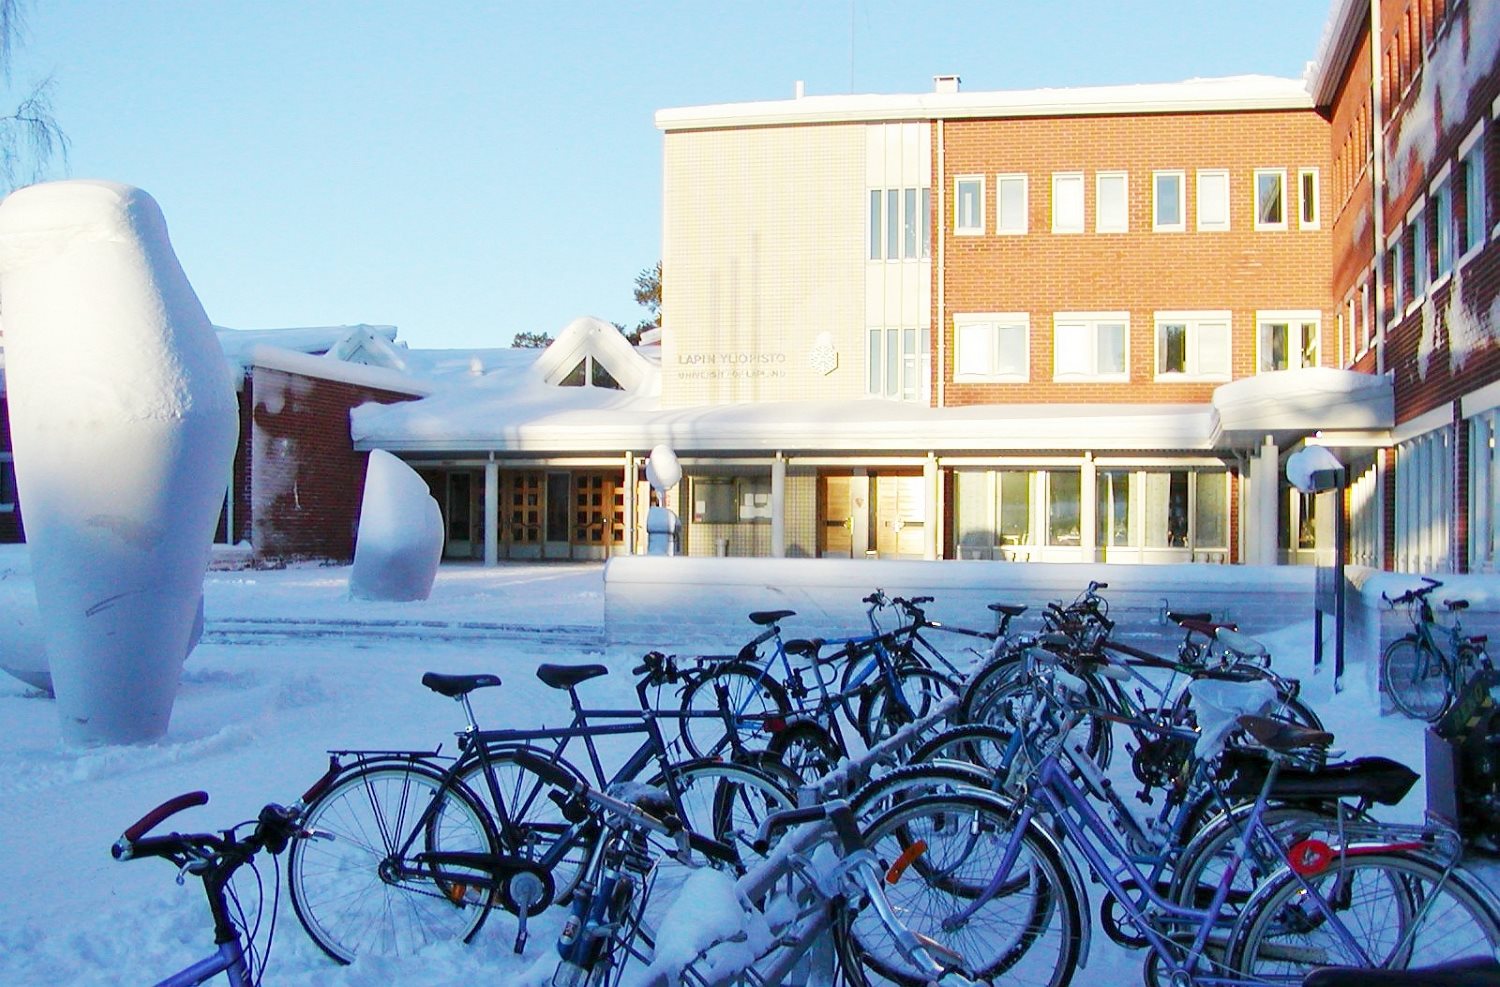 18-intriguing-facts-about-university-of-lapland